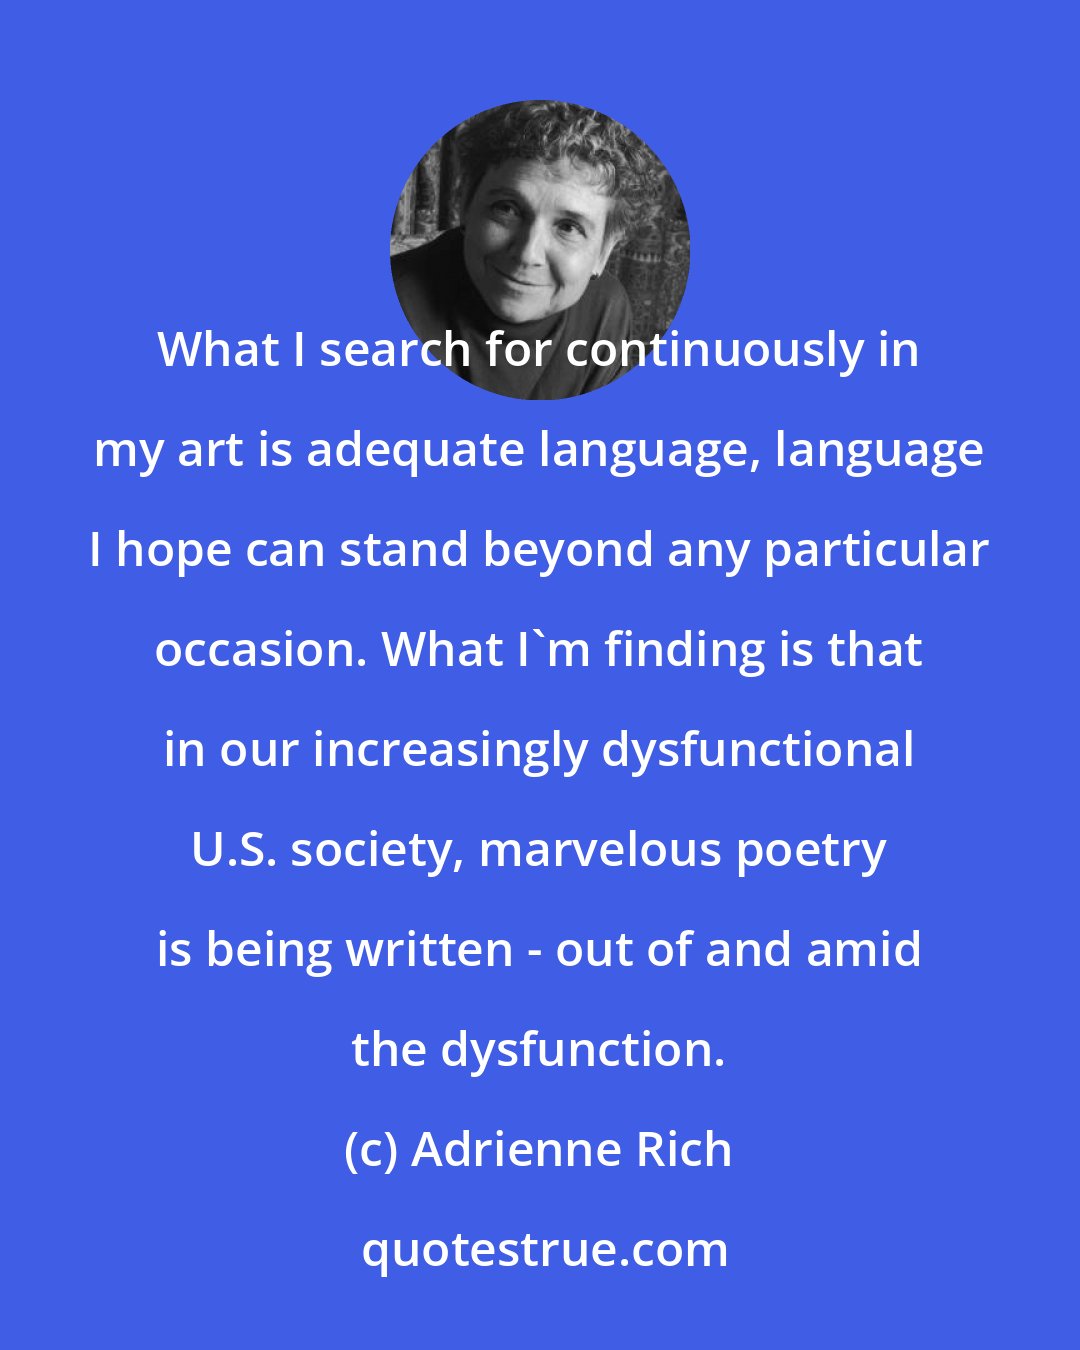 Adrienne Rich: What I search for continuously in my art is adequate language, language I hope can stand beyond any particular occasion. What I'm finding is that in our increasingly dysfunctional U.S. society, marvelous poetry is being written - out of and amid the dysfunction.